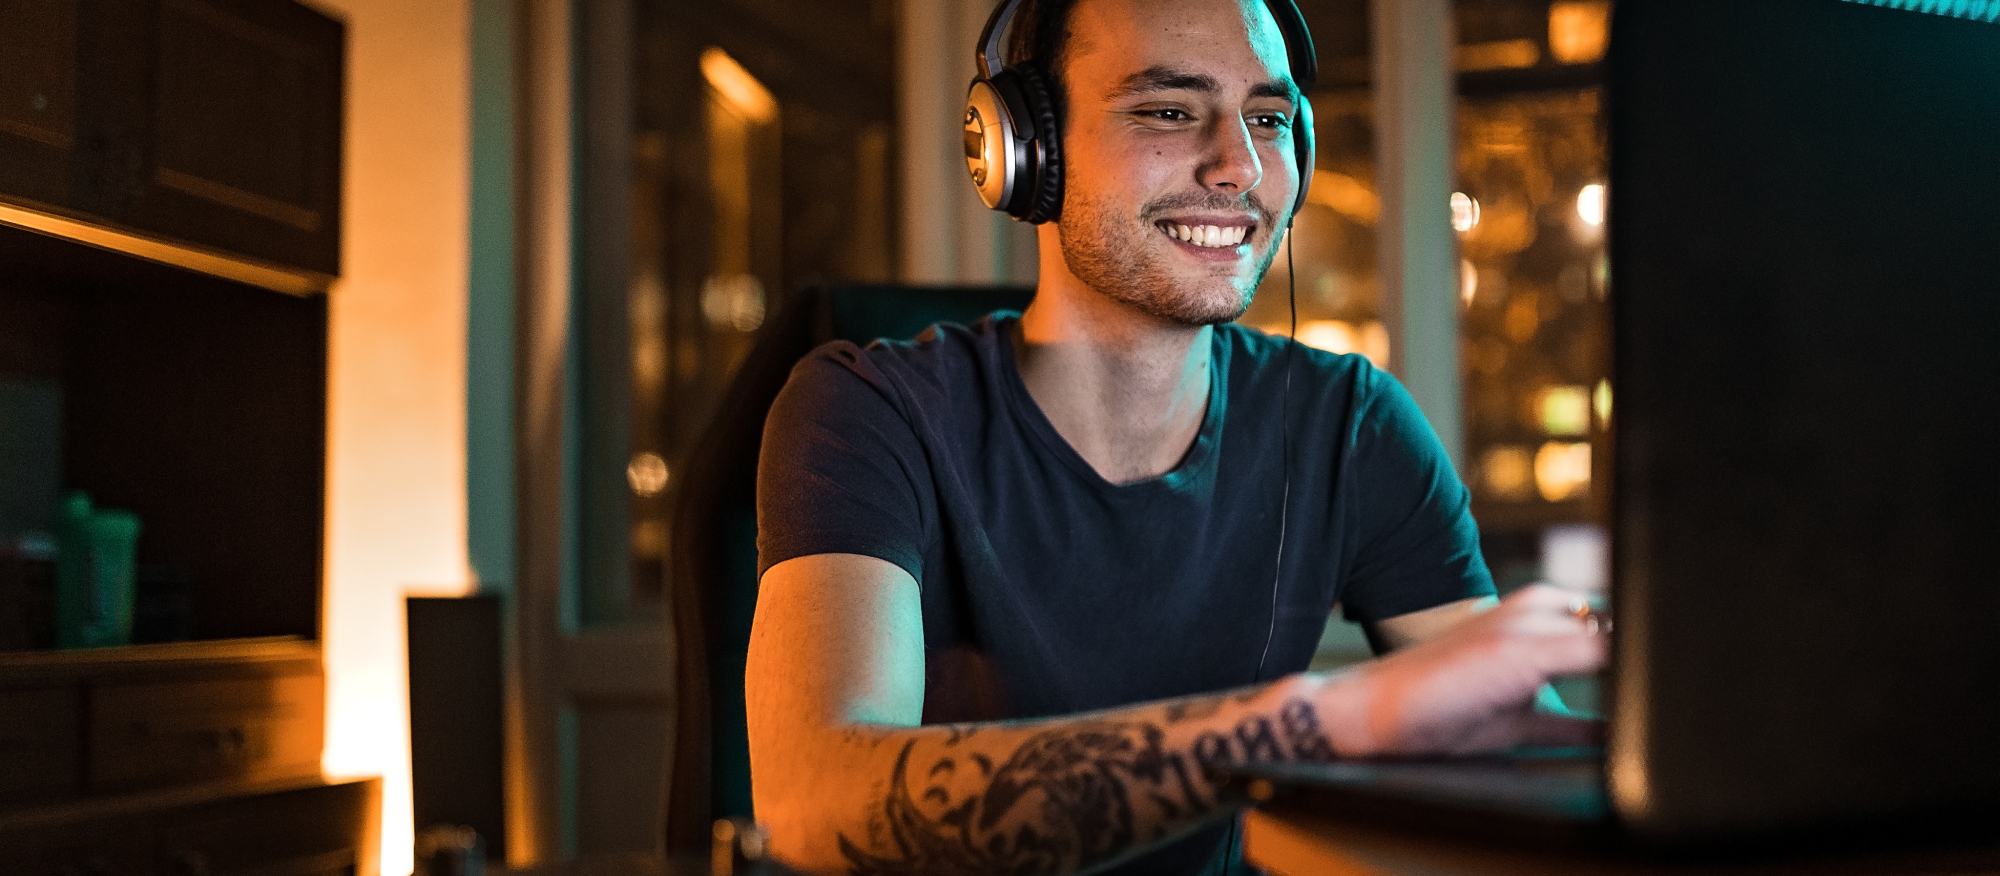 A creative wearing headphones works at a computer.